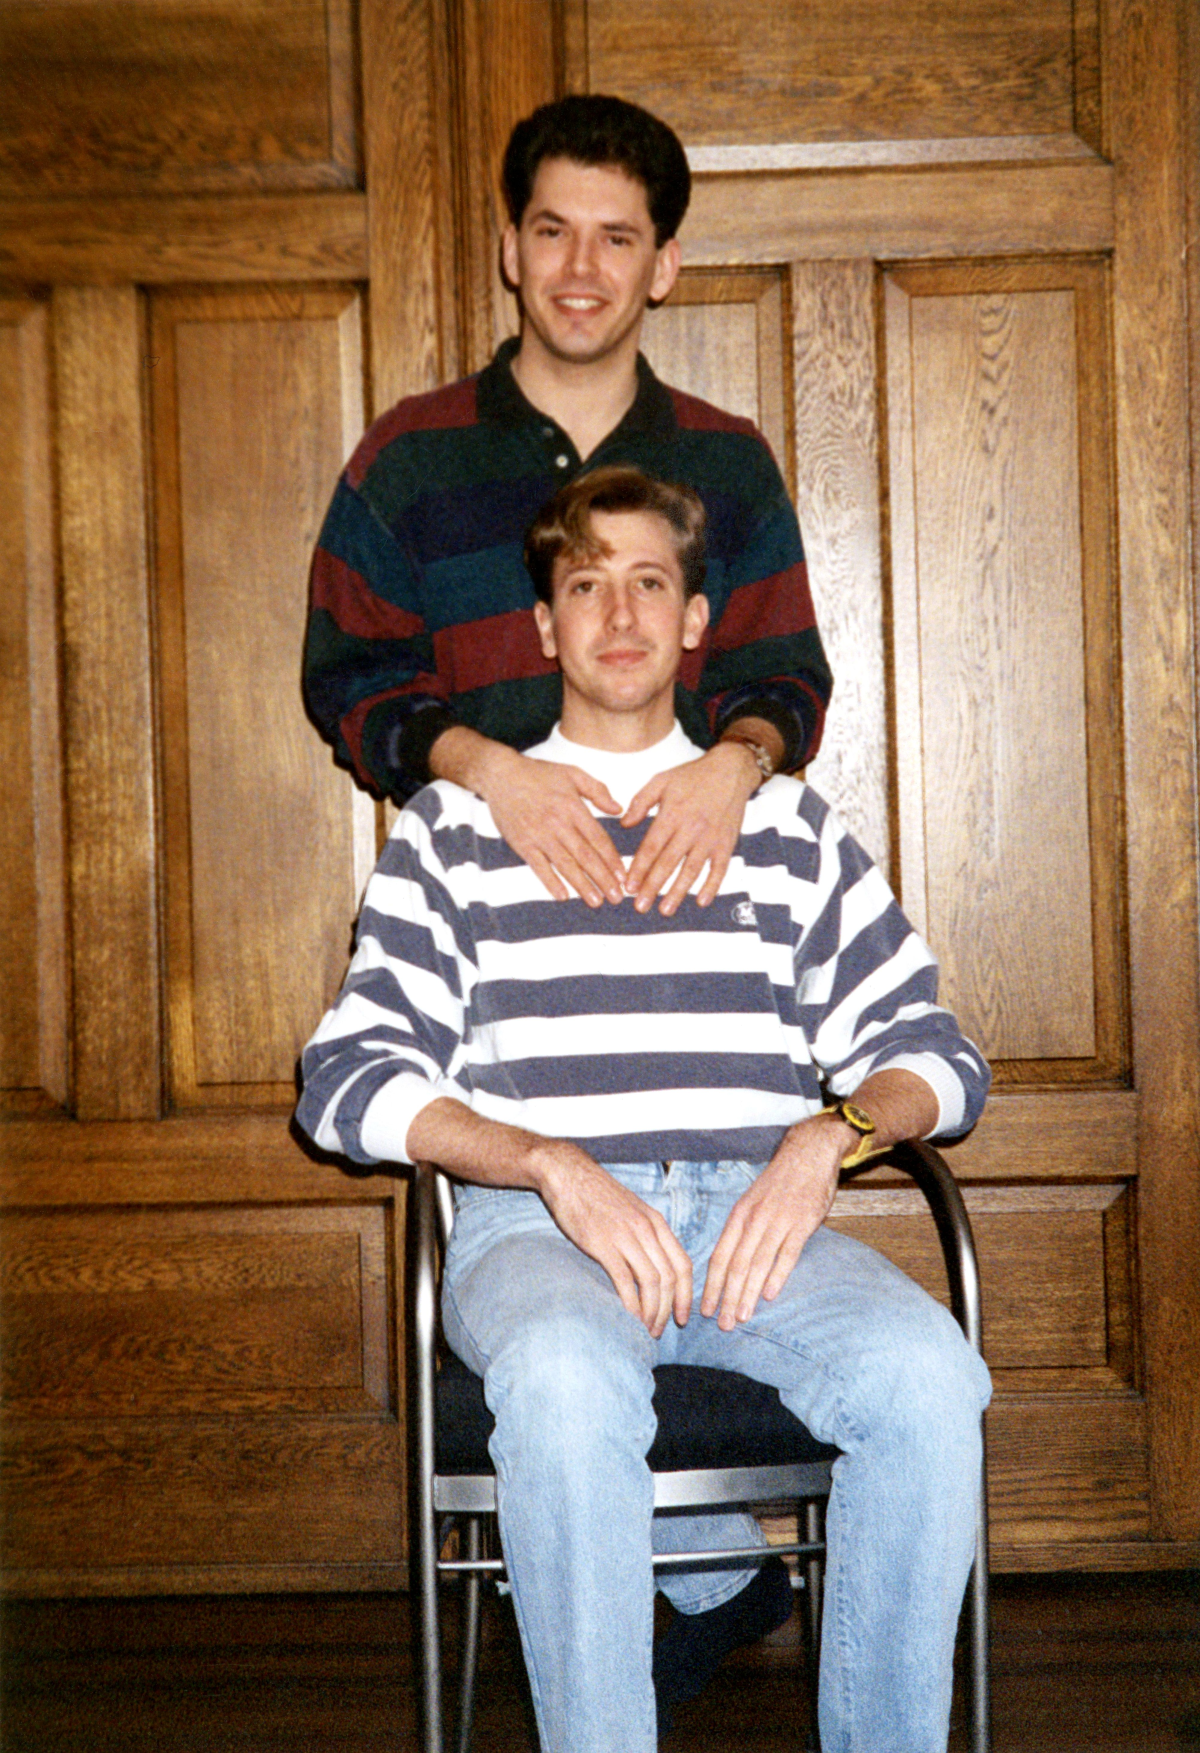 Jim Obergefell, standing, and John Arthur in 1993, around the time they met. 